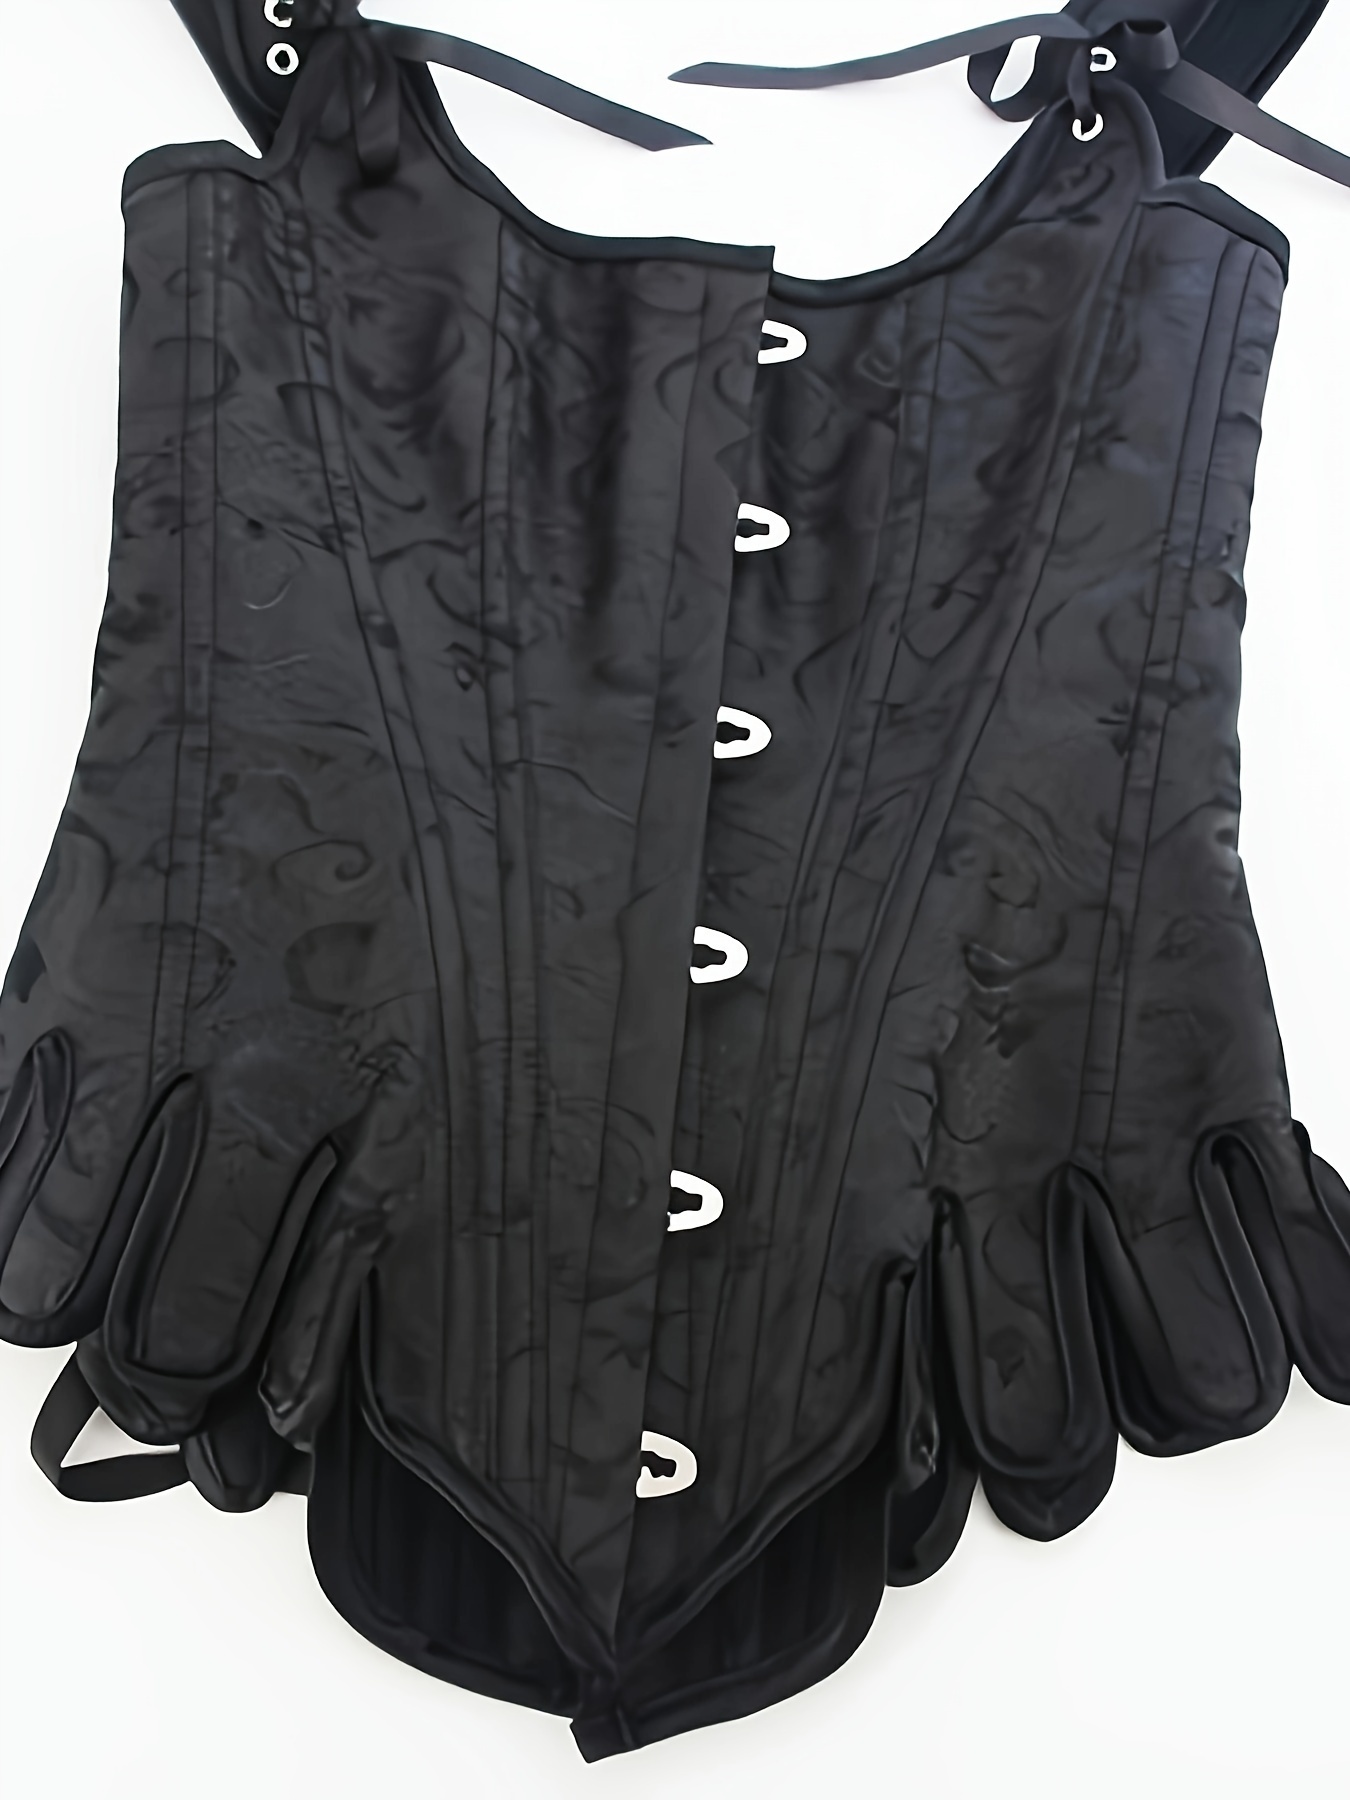 Lace Up Corset Tube Top, Stylish Bustier Bodice Strapless Carnival Costume,  Women's Clothing